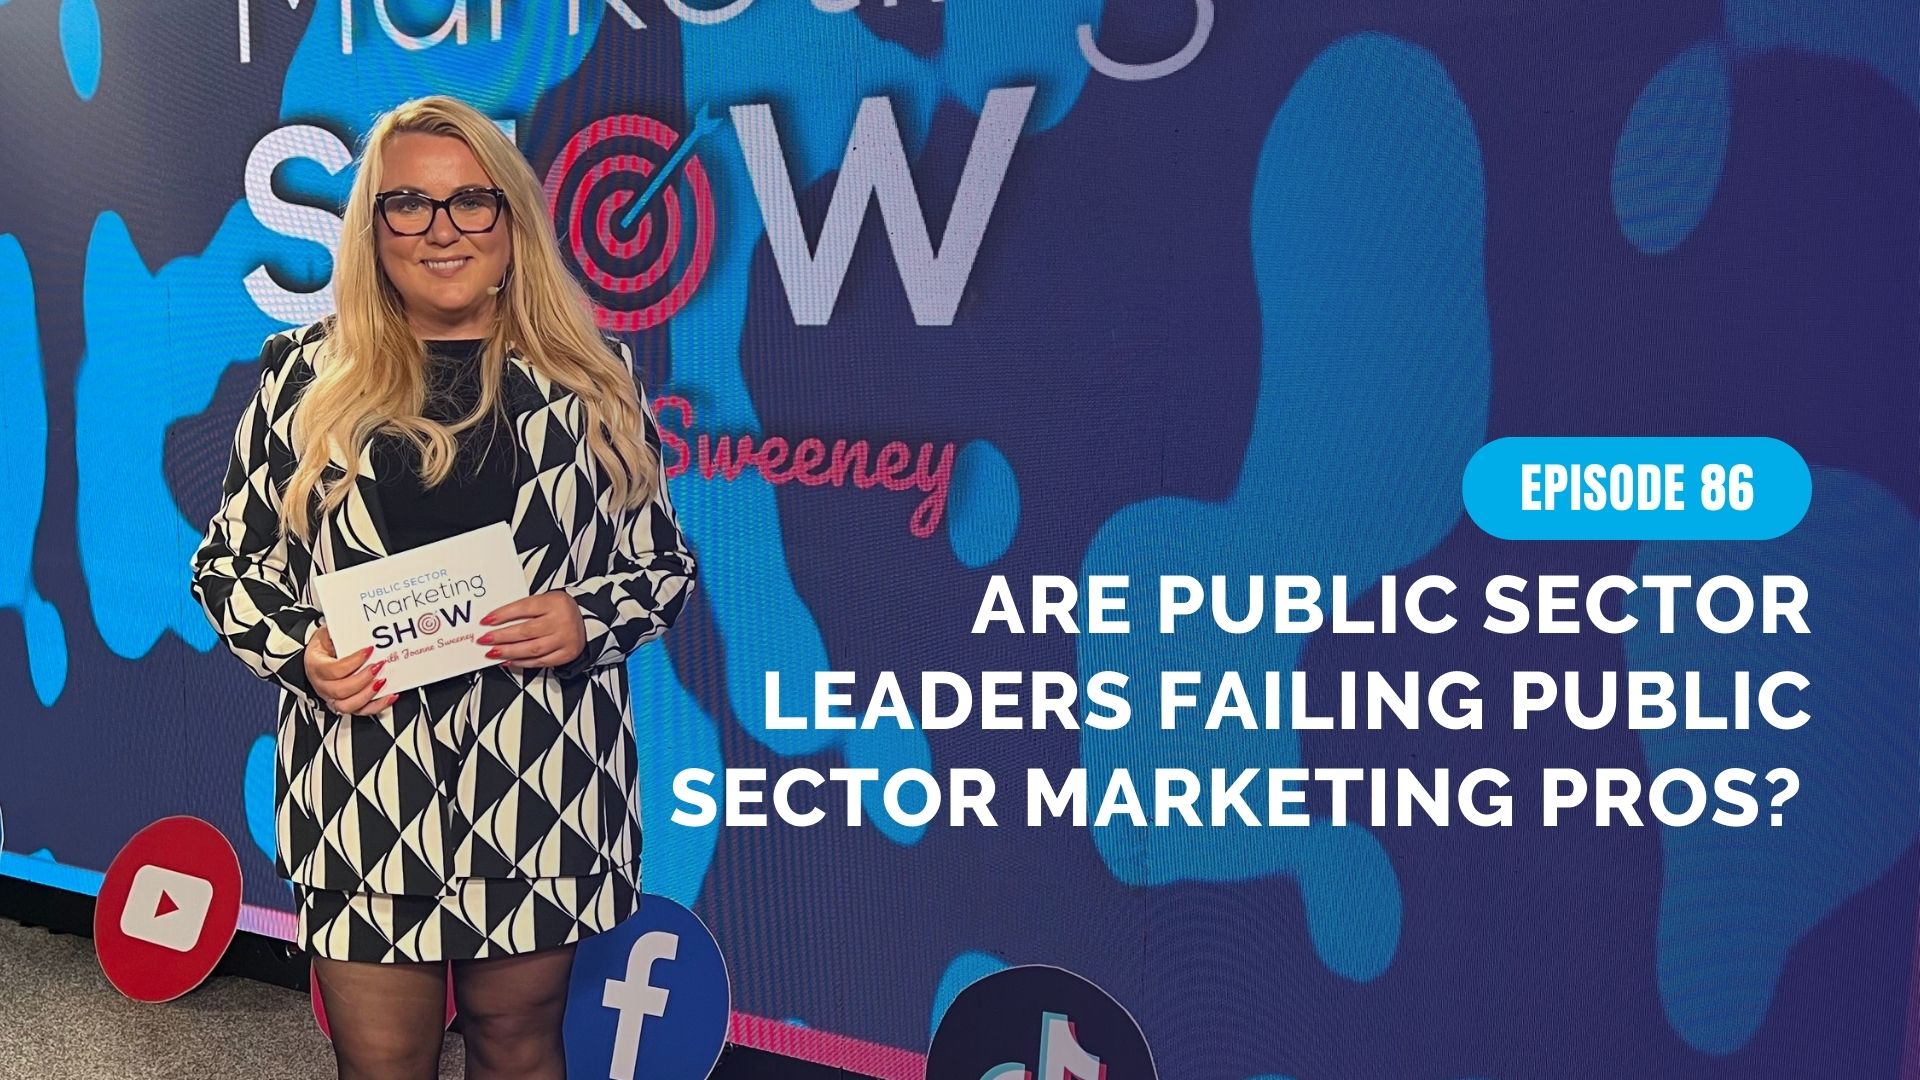 Are public sector leaders failing public sector marketing pros?